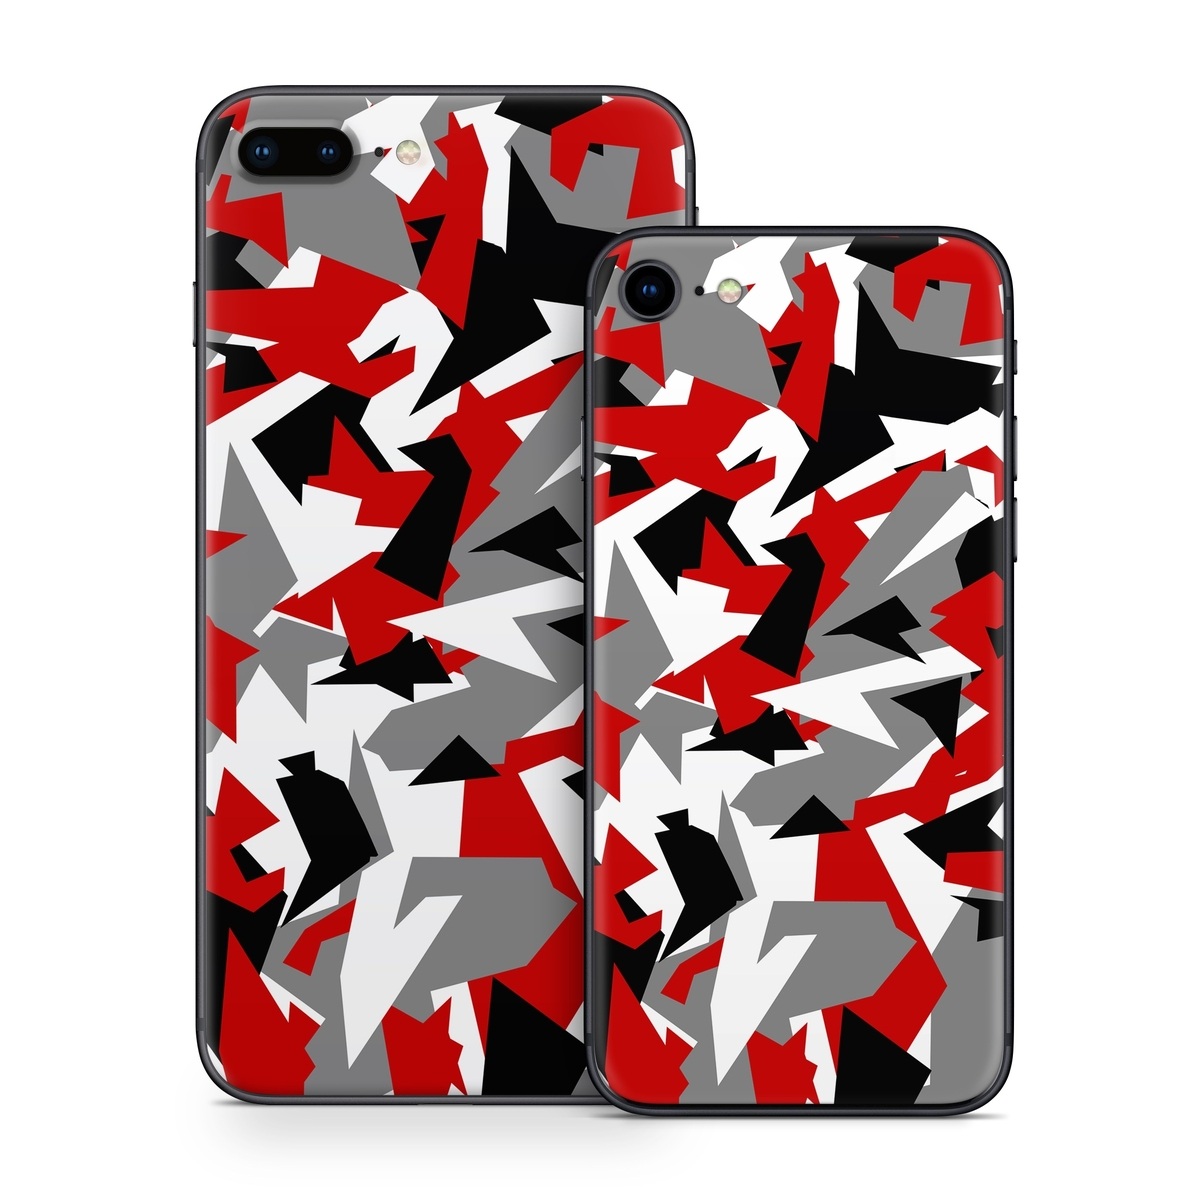 iPhone 8 Series Skin design of Red, Pattern, Font, Design, Textile, Carmine, Illustration, Flag, Crowd, with red, white, black, gray colors